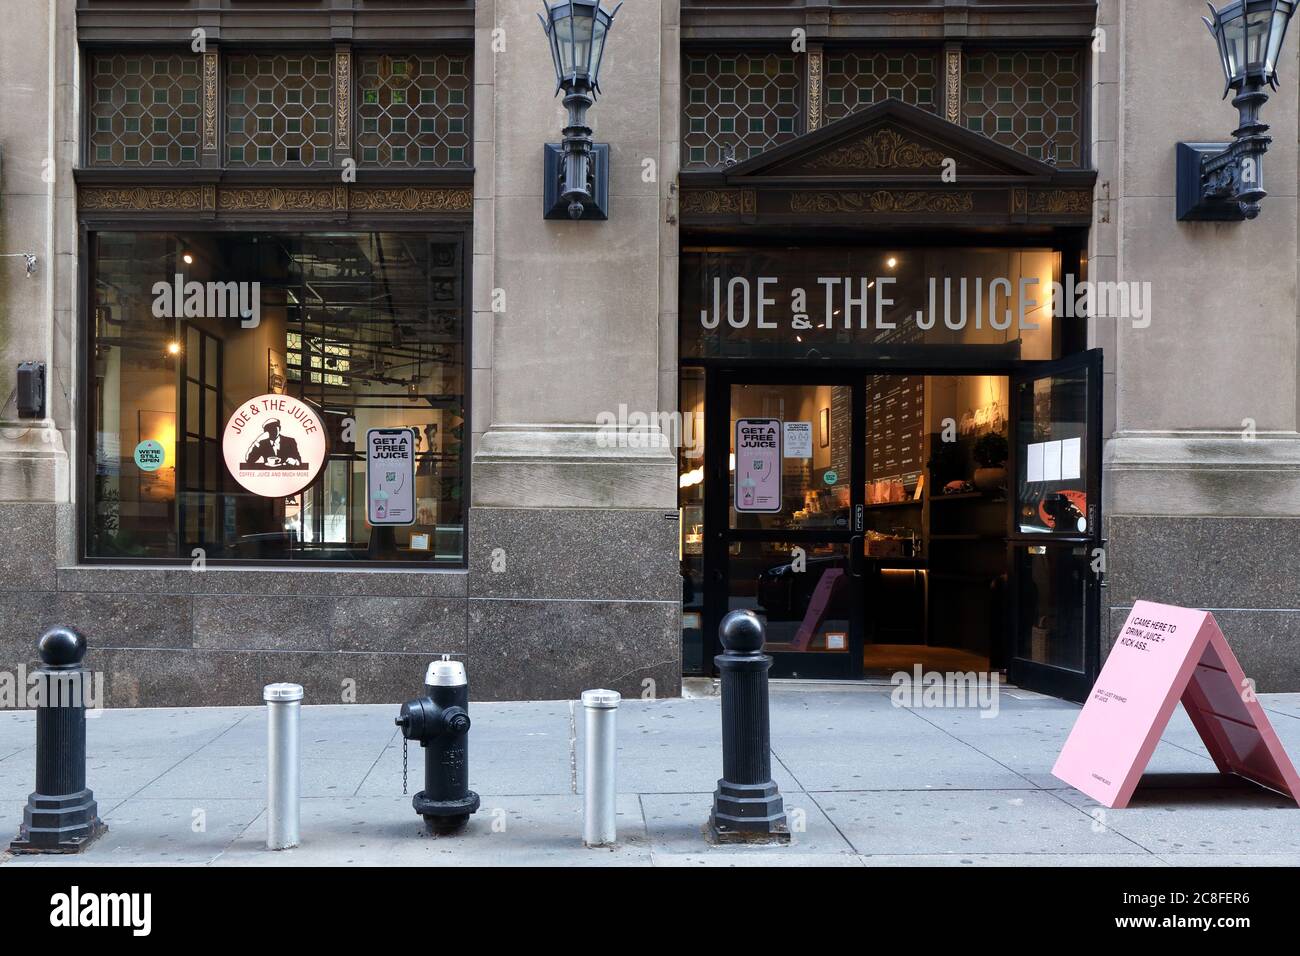 Joe & The Juice, 67 Wall St, New York, NY. exterior storefront of a juice bar and coffee shop in Manhattan's Financial District. Stock Photo